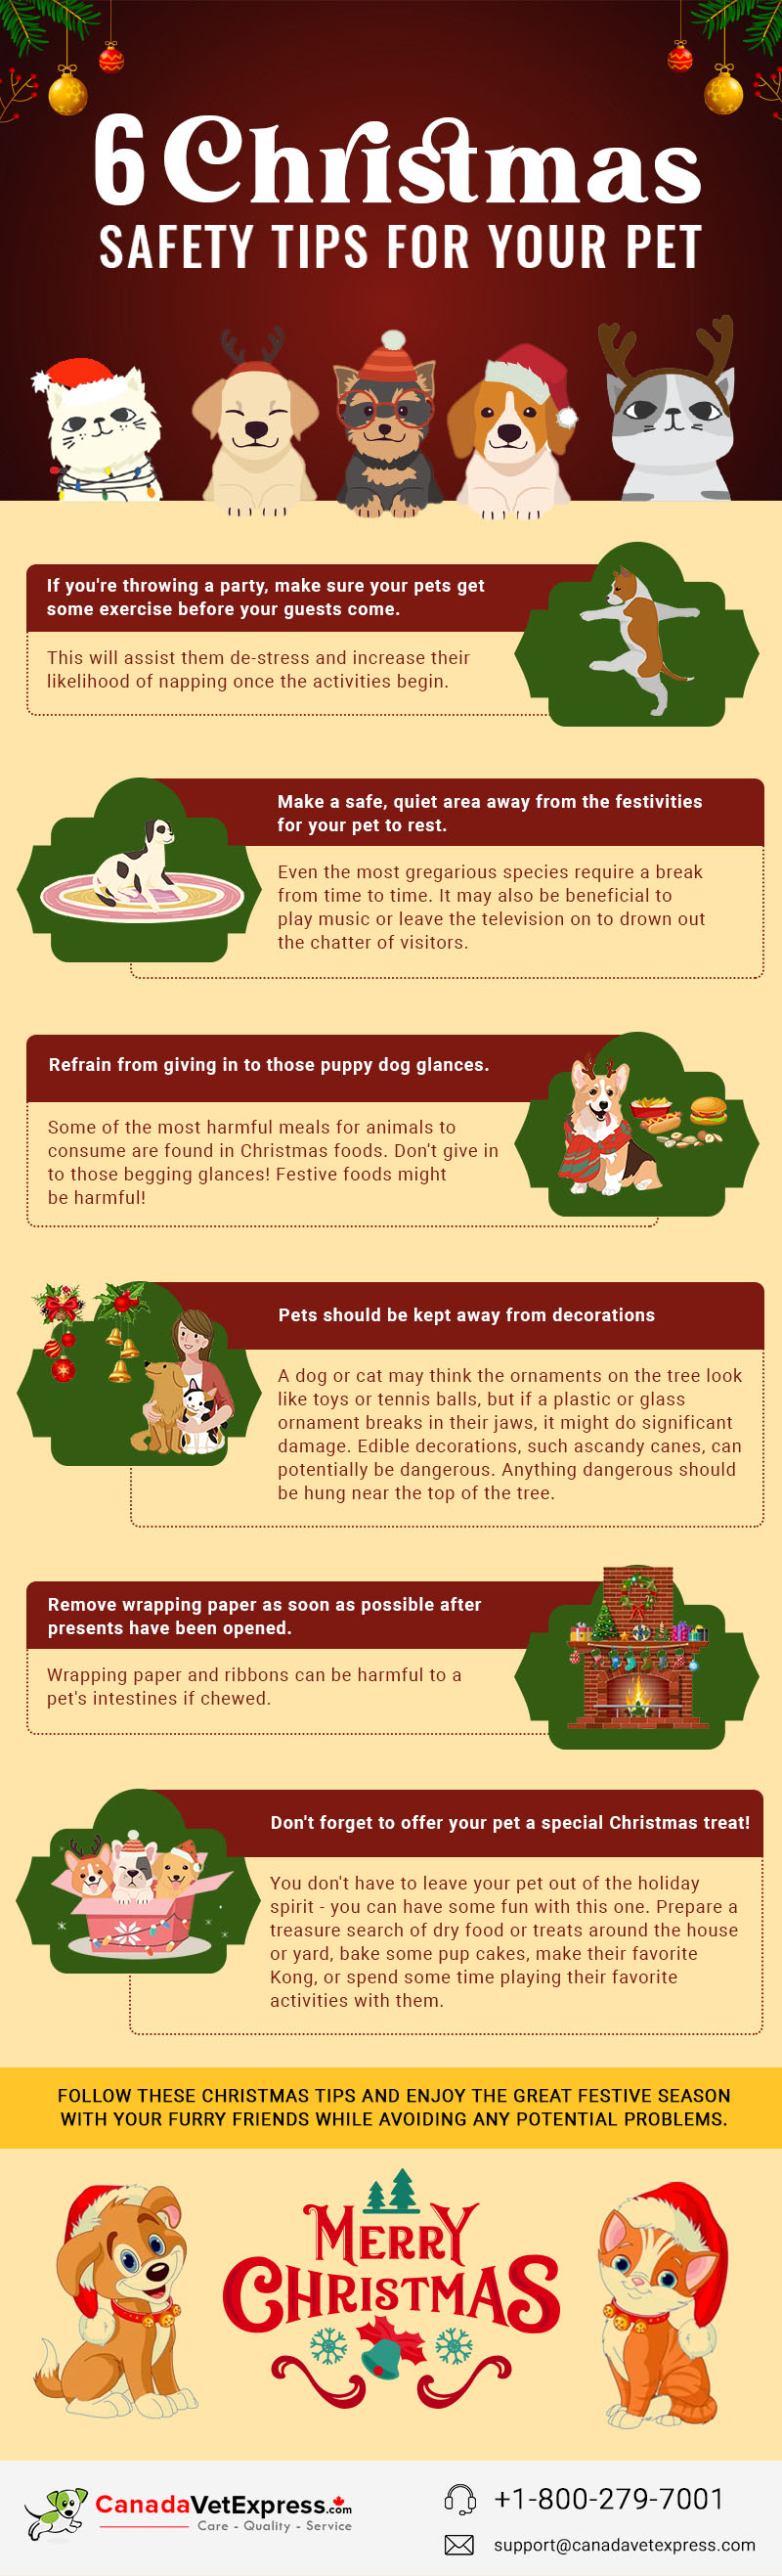 6 Christmas Safety Tips For Your Pets